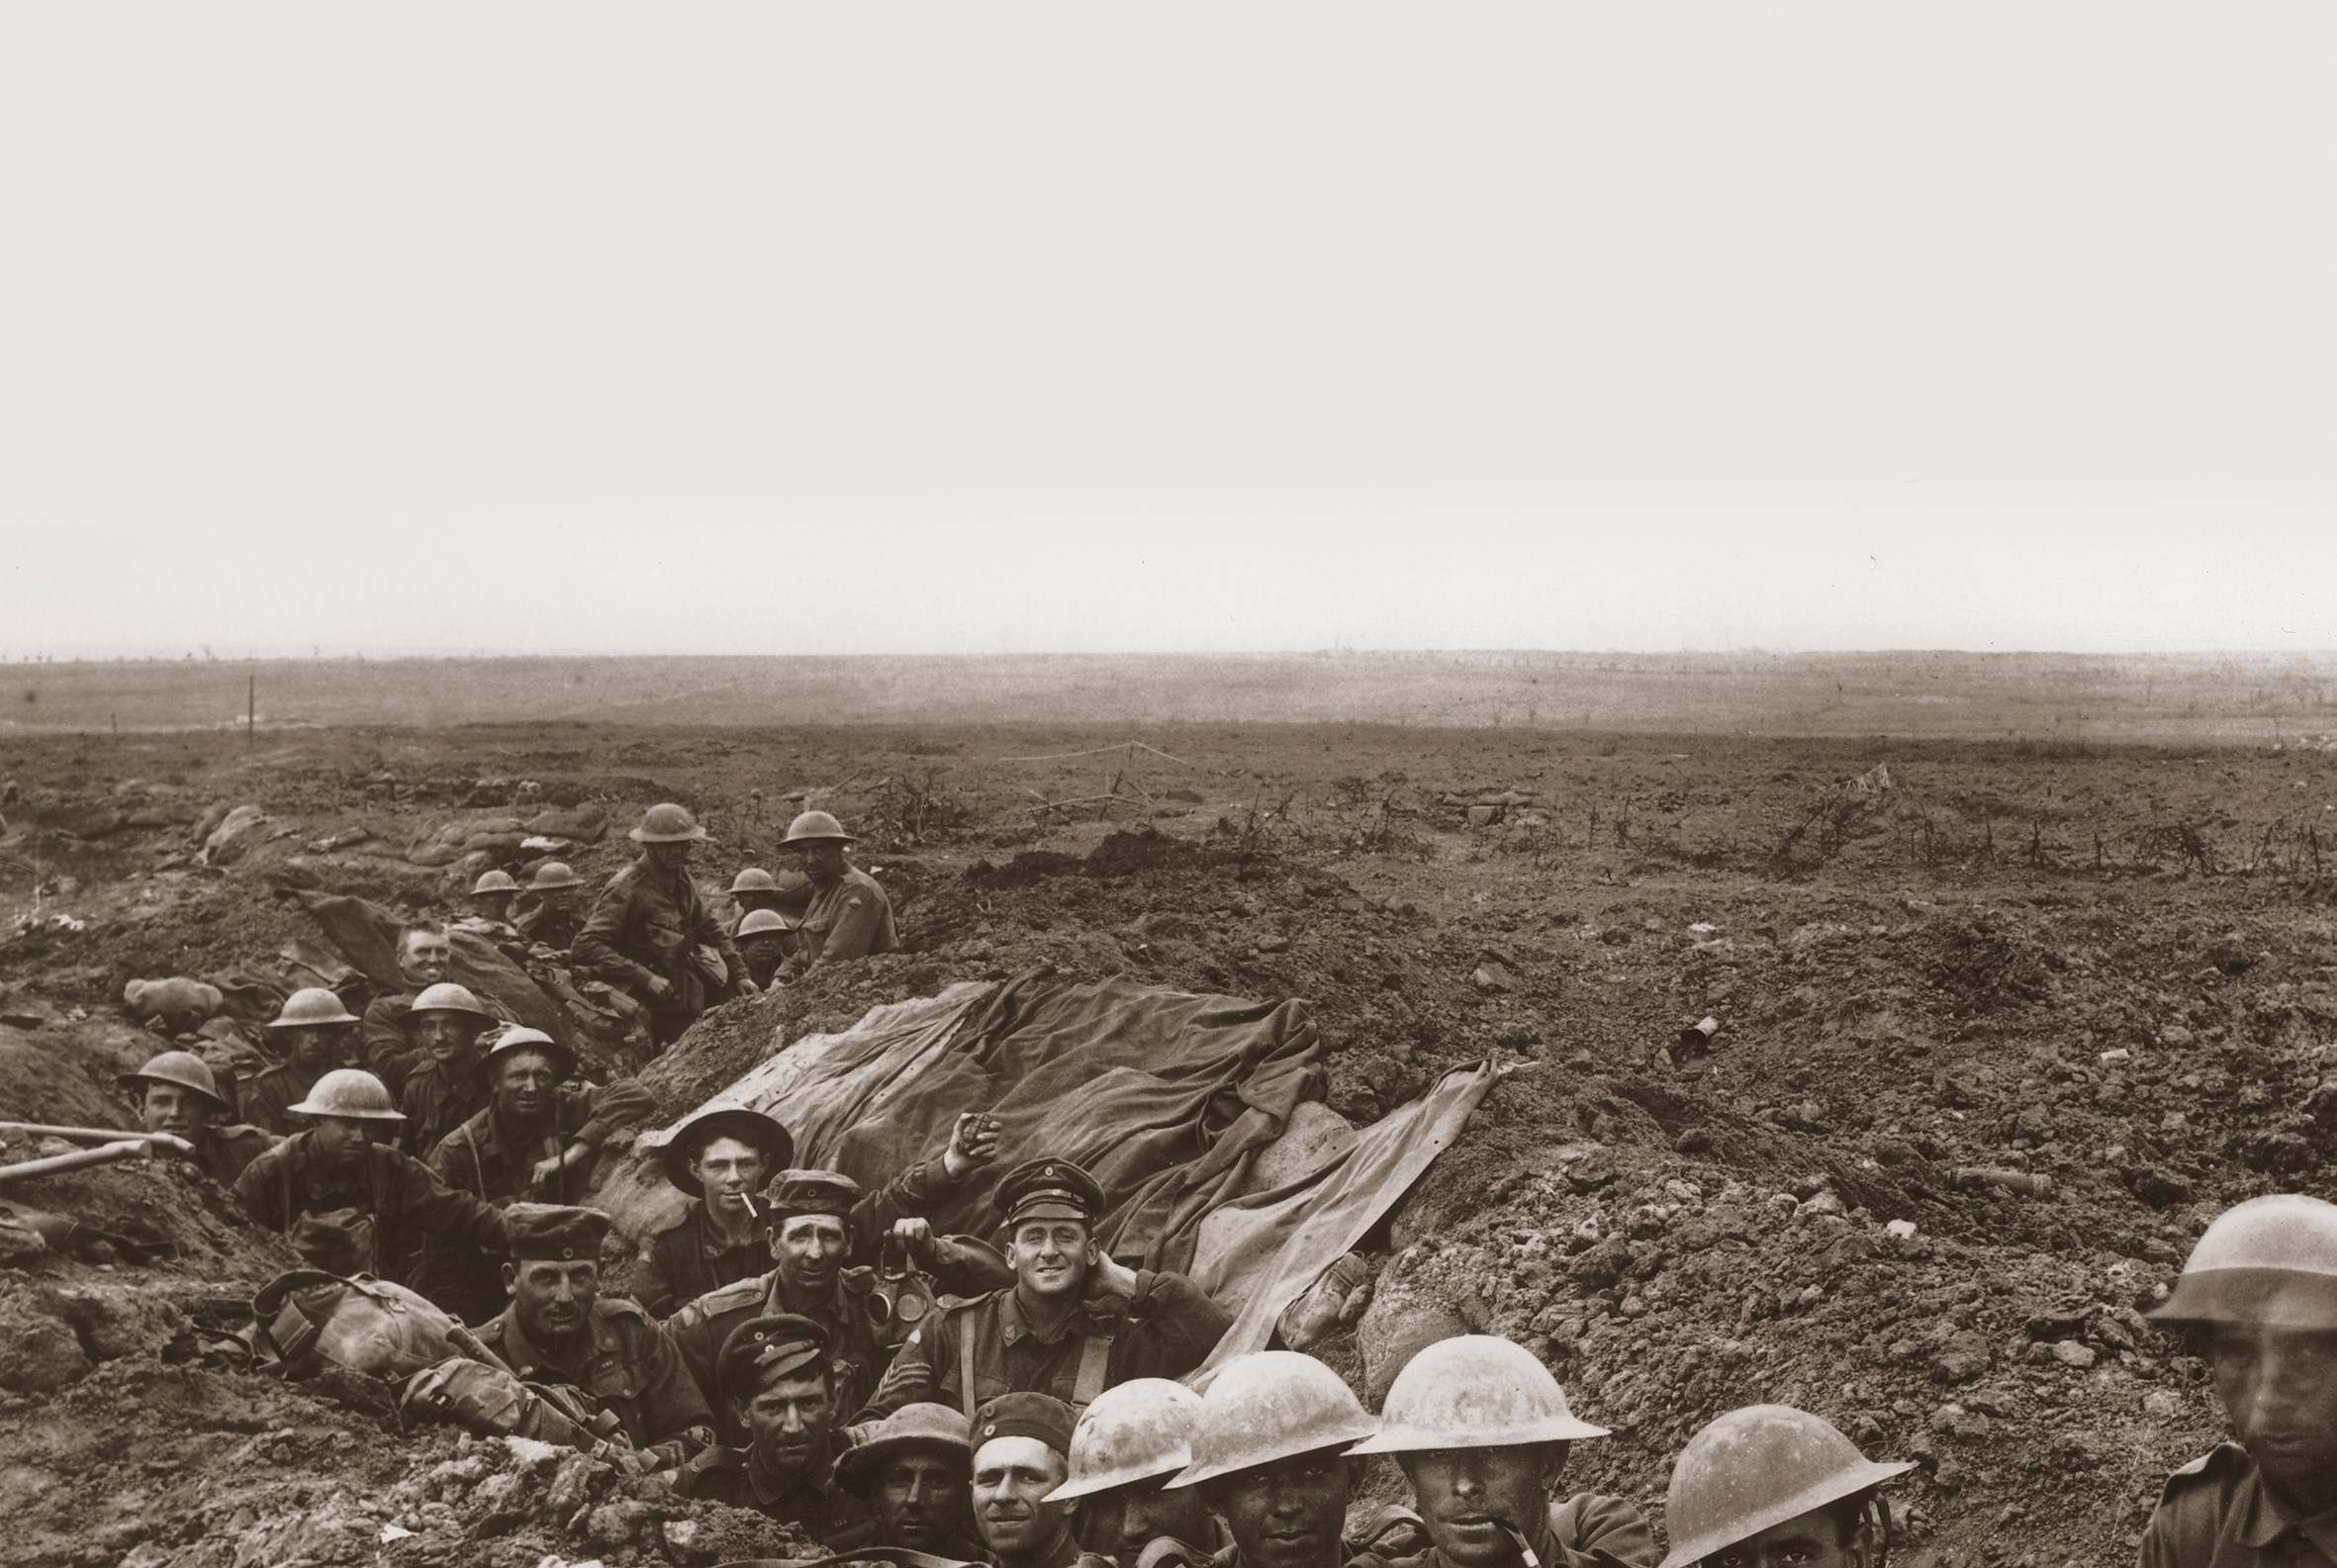 Photographs of the trenches from the In Flanders Fields